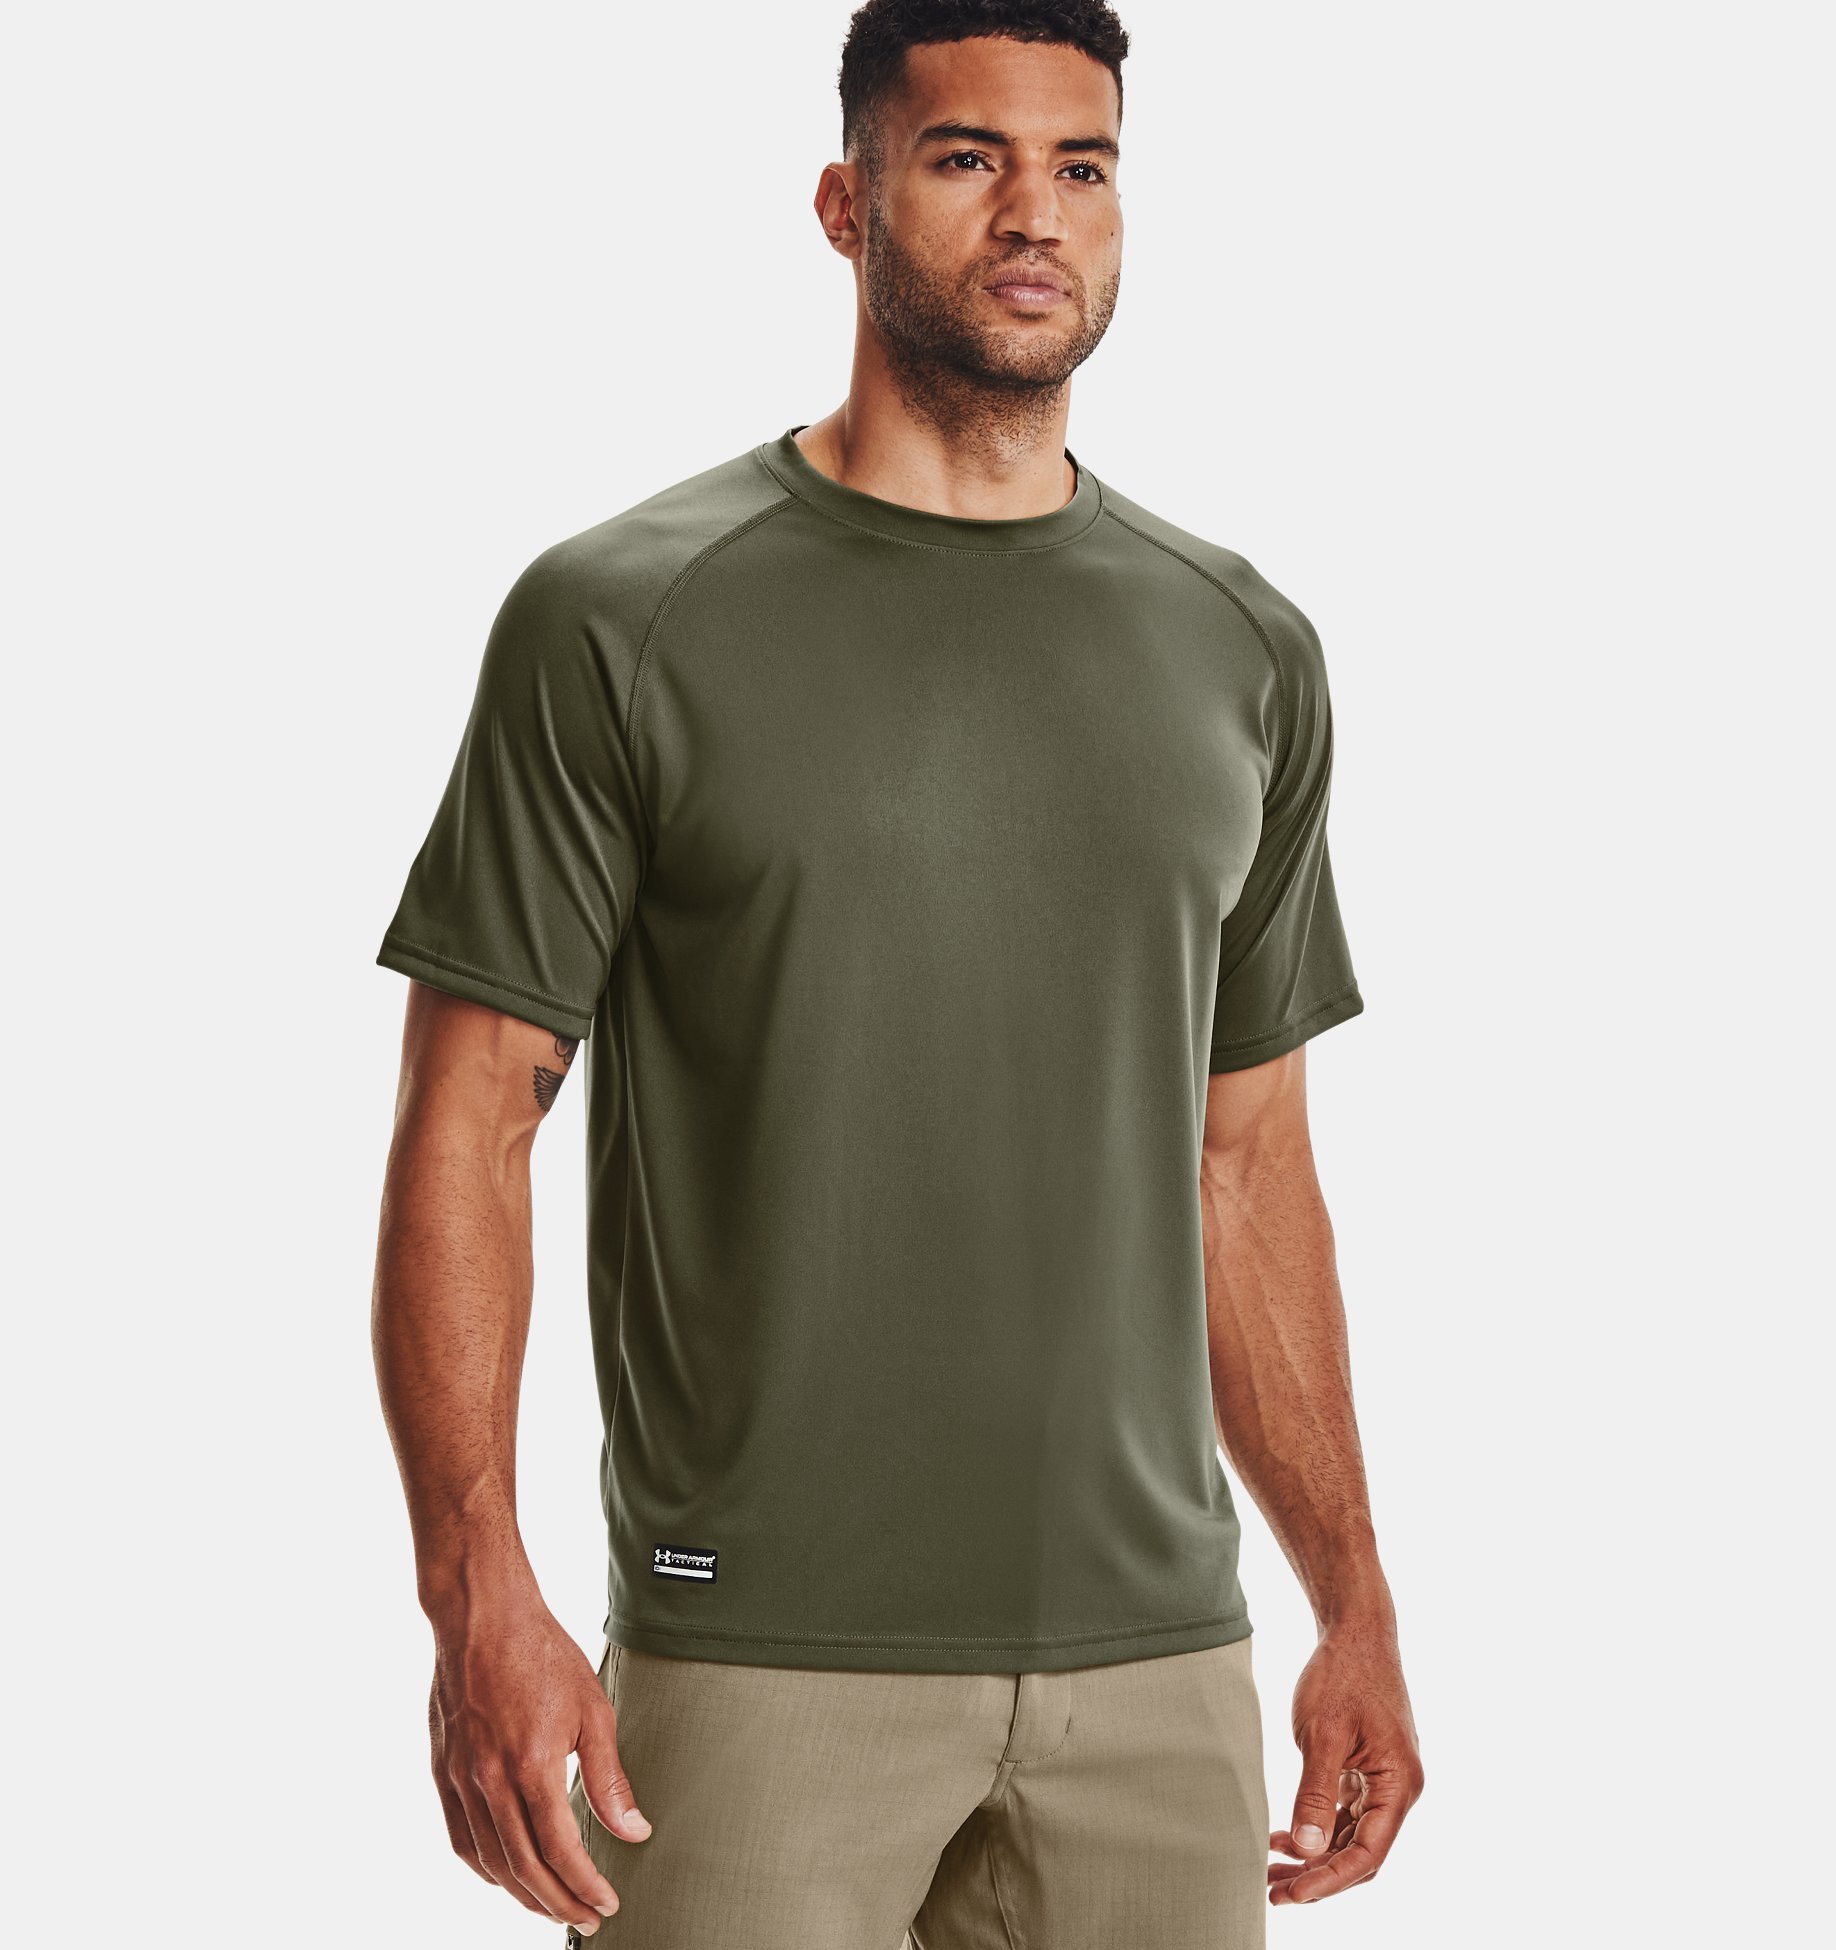 ONE SIZE MEN'S POLYESTER GREEN PRACTICE SHIRT 